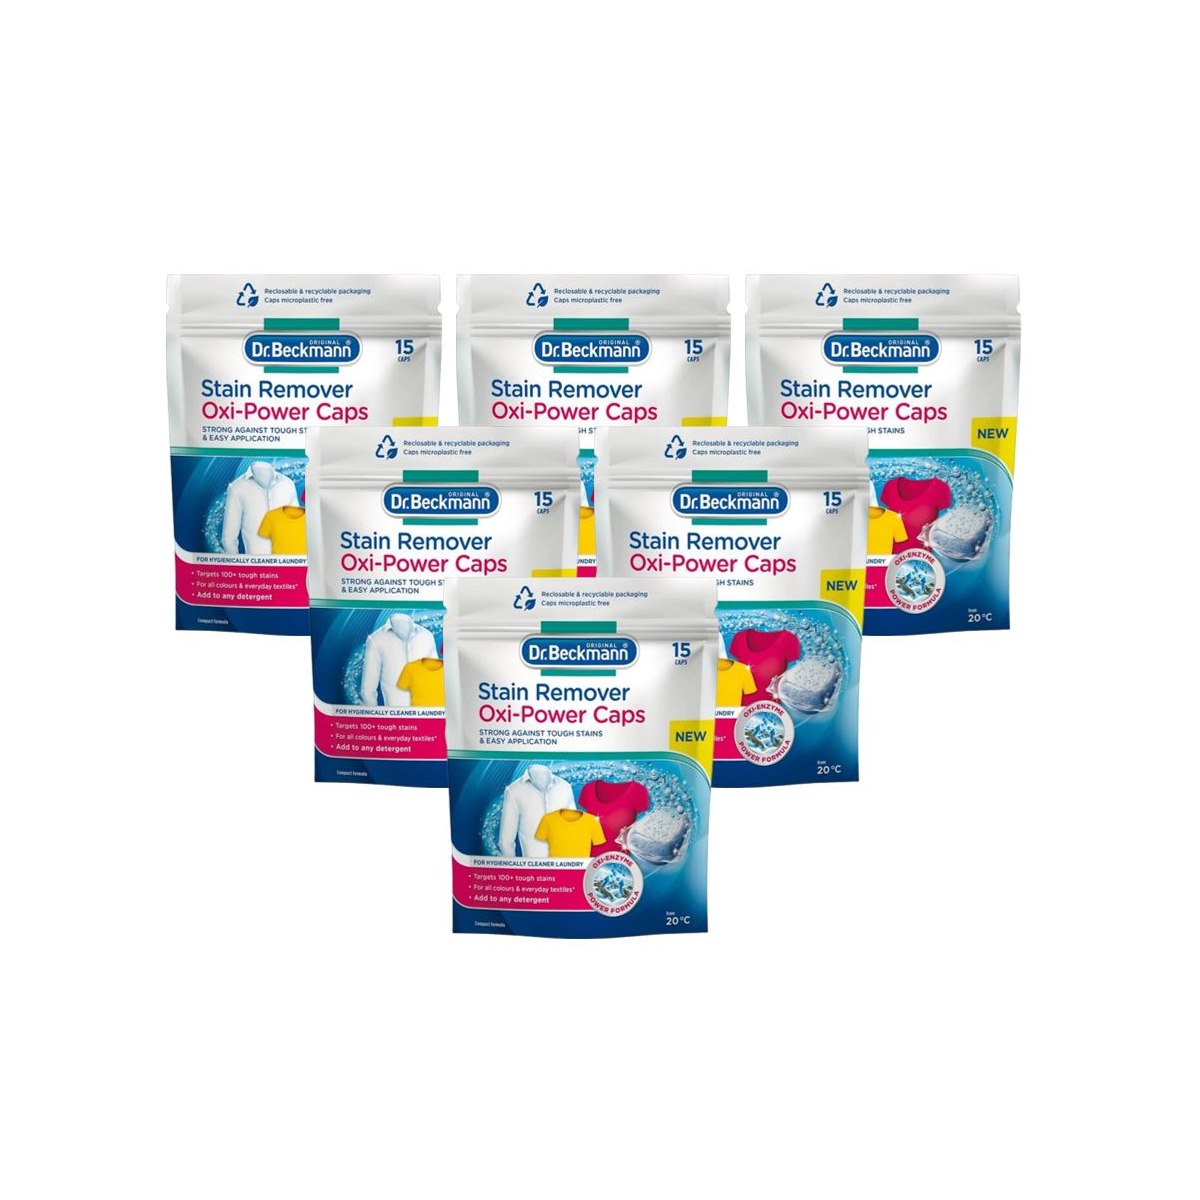 Case of 6 x Dr Beckmann Oxi-Power Caps Stain Remover Pop in Wash - 15 Washes